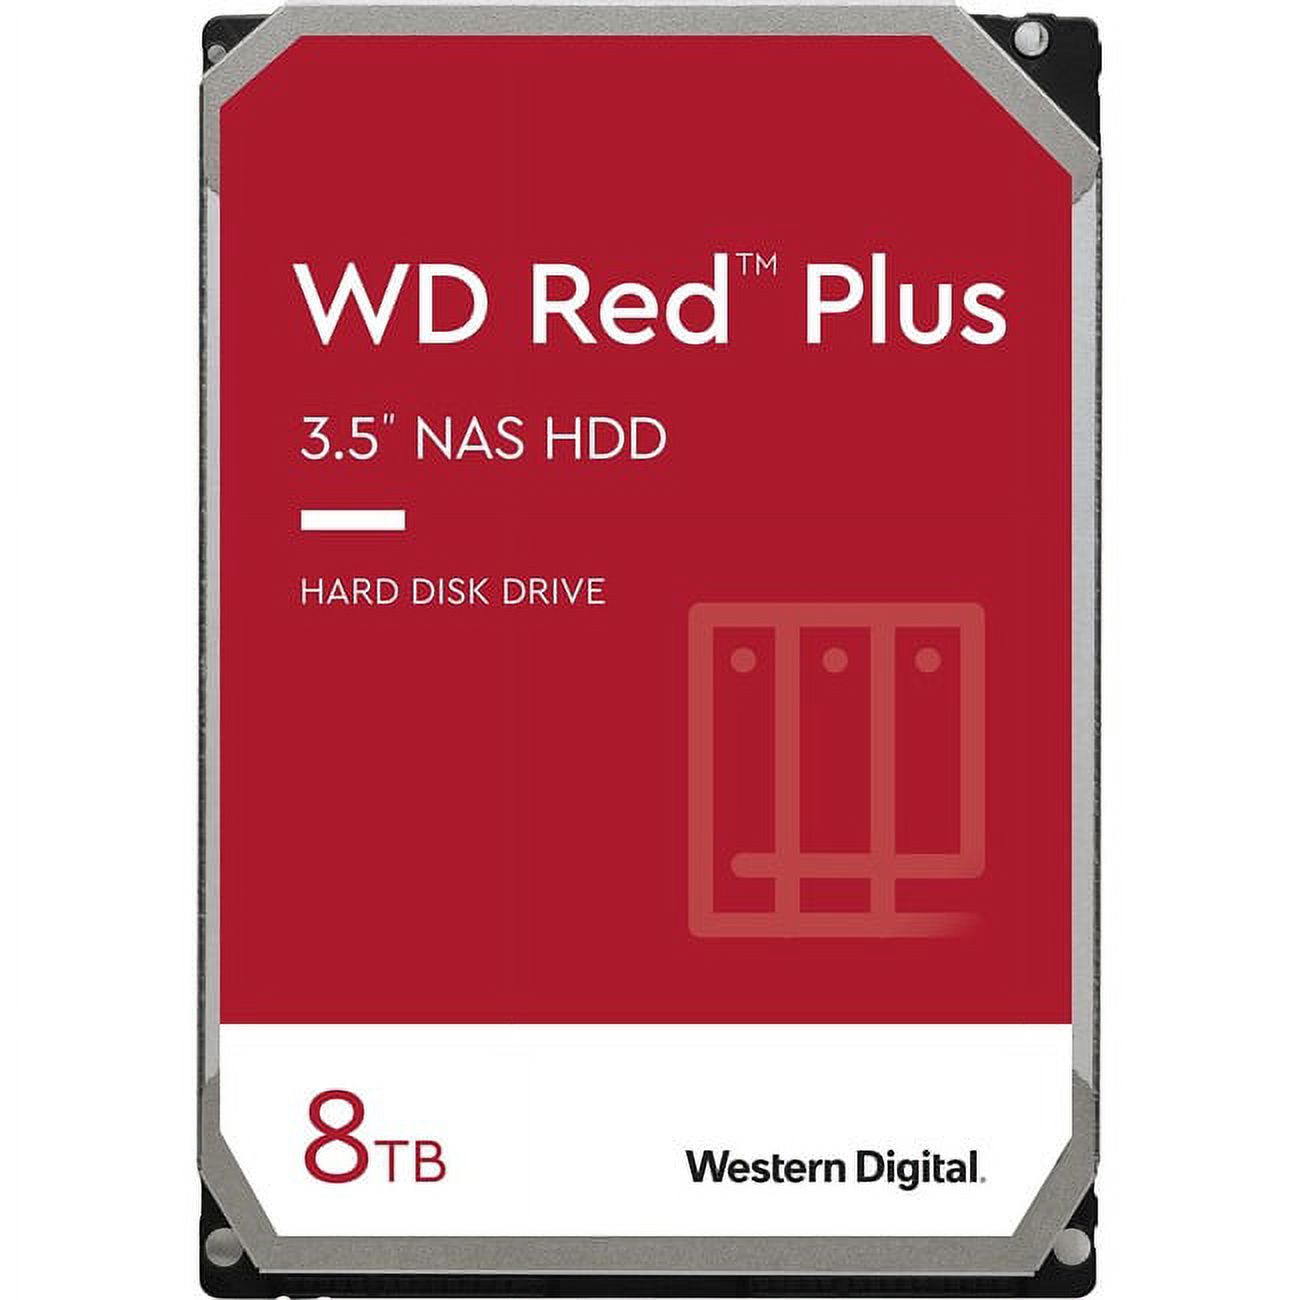 WD WD80EFAX Red Plus WD80EFAX 8 TB Hard Drive - 3.5" Internal - SATA (SATA/600) - Conventional Magnetic Recording (CMR) Used - image 1 of 1